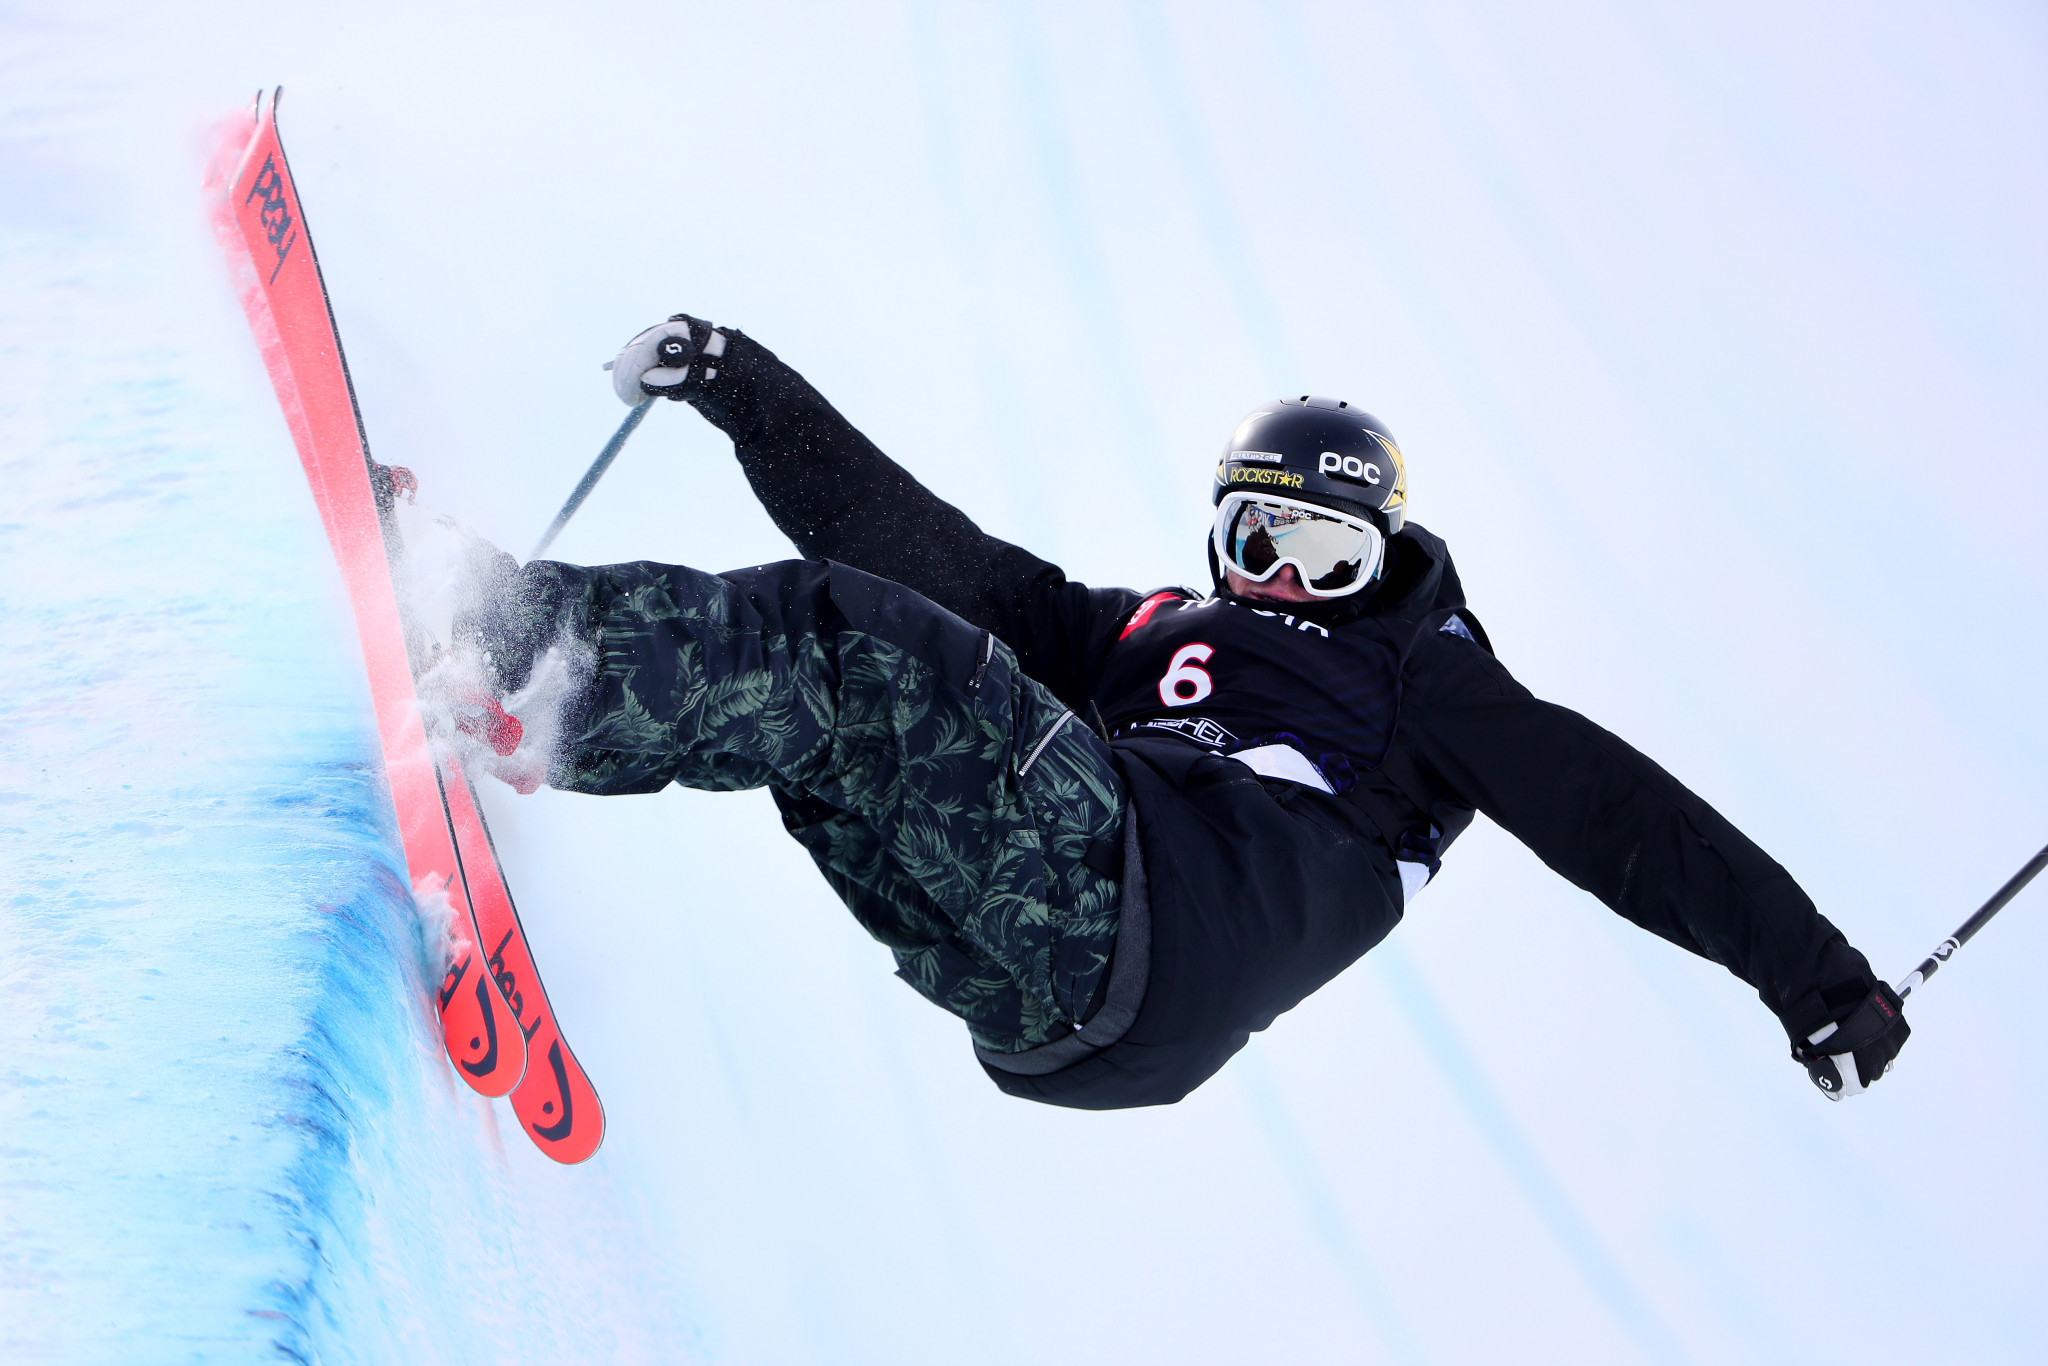 Two-time world champion Aaron Blunck is among the favourites ©Getty Images